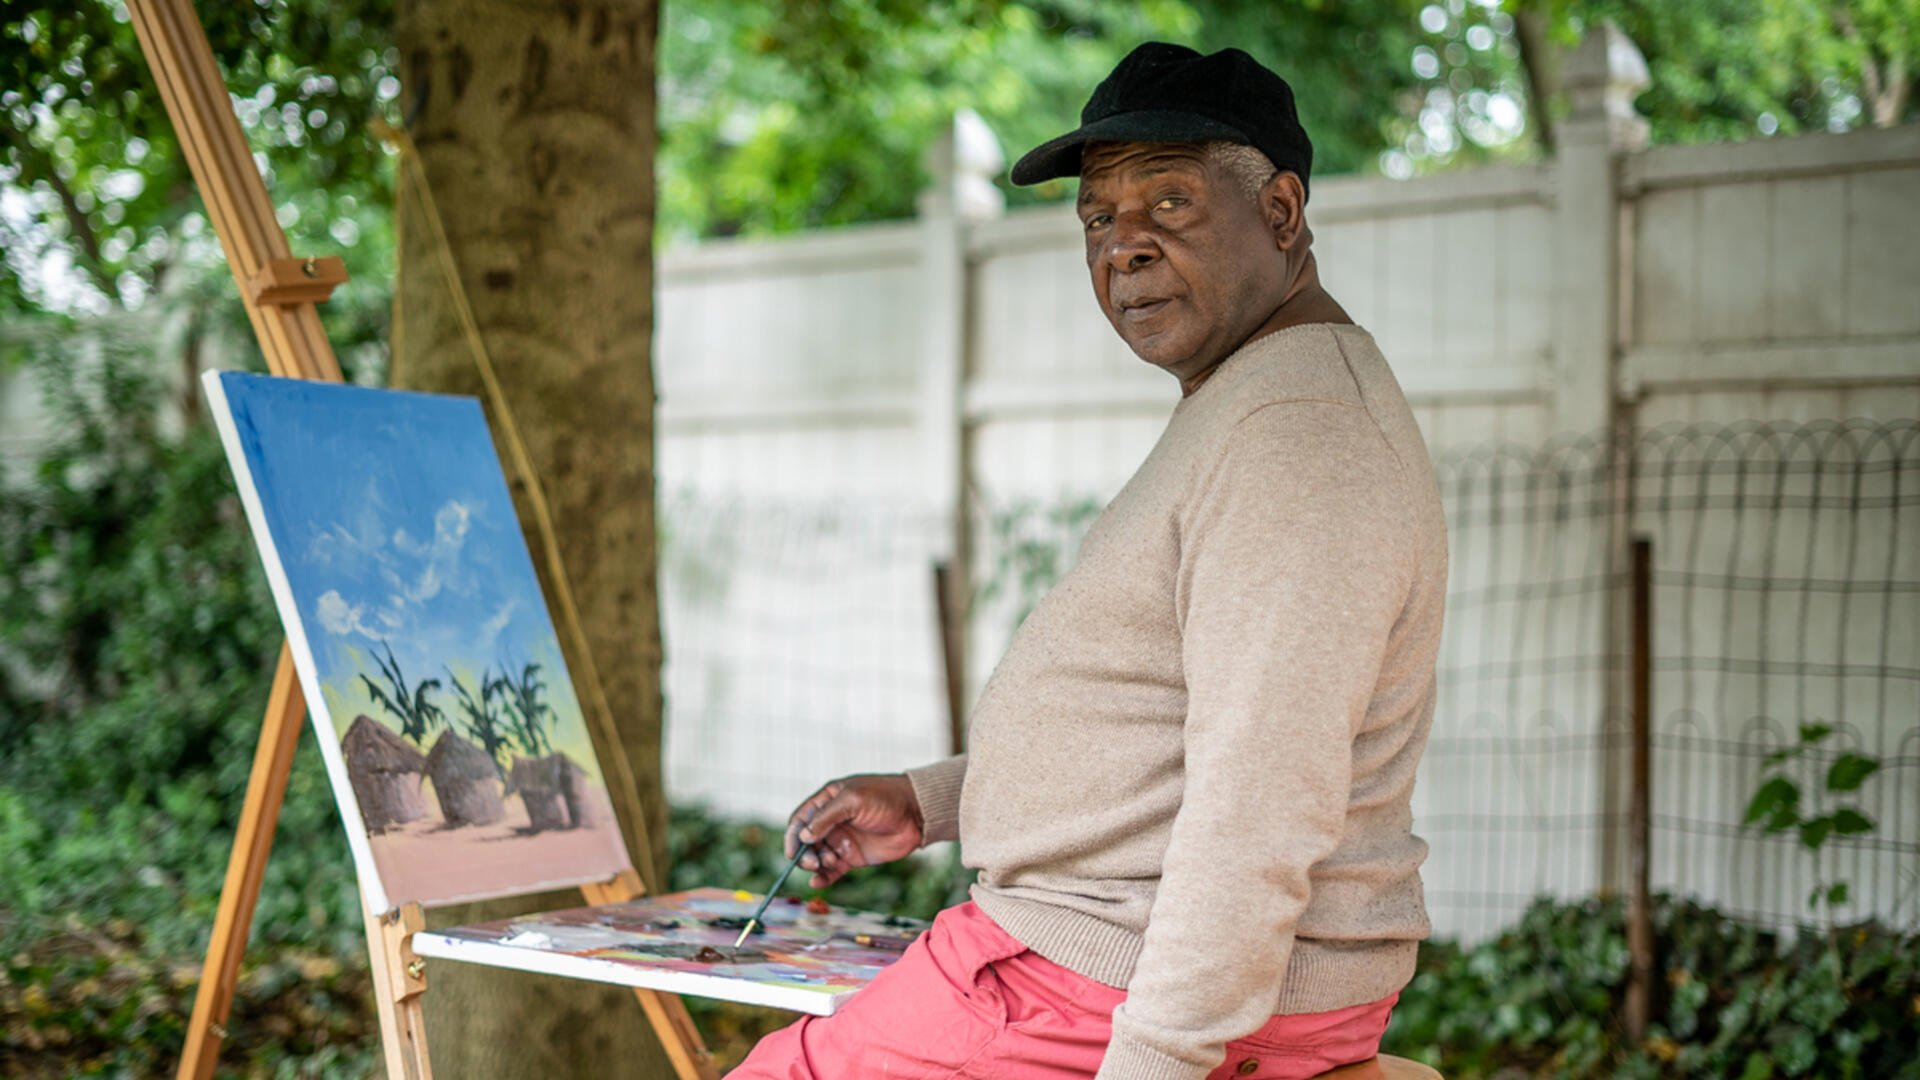 Congolese artist Muyambo Marcel Chishimba site outside at his easel painting a landscape 